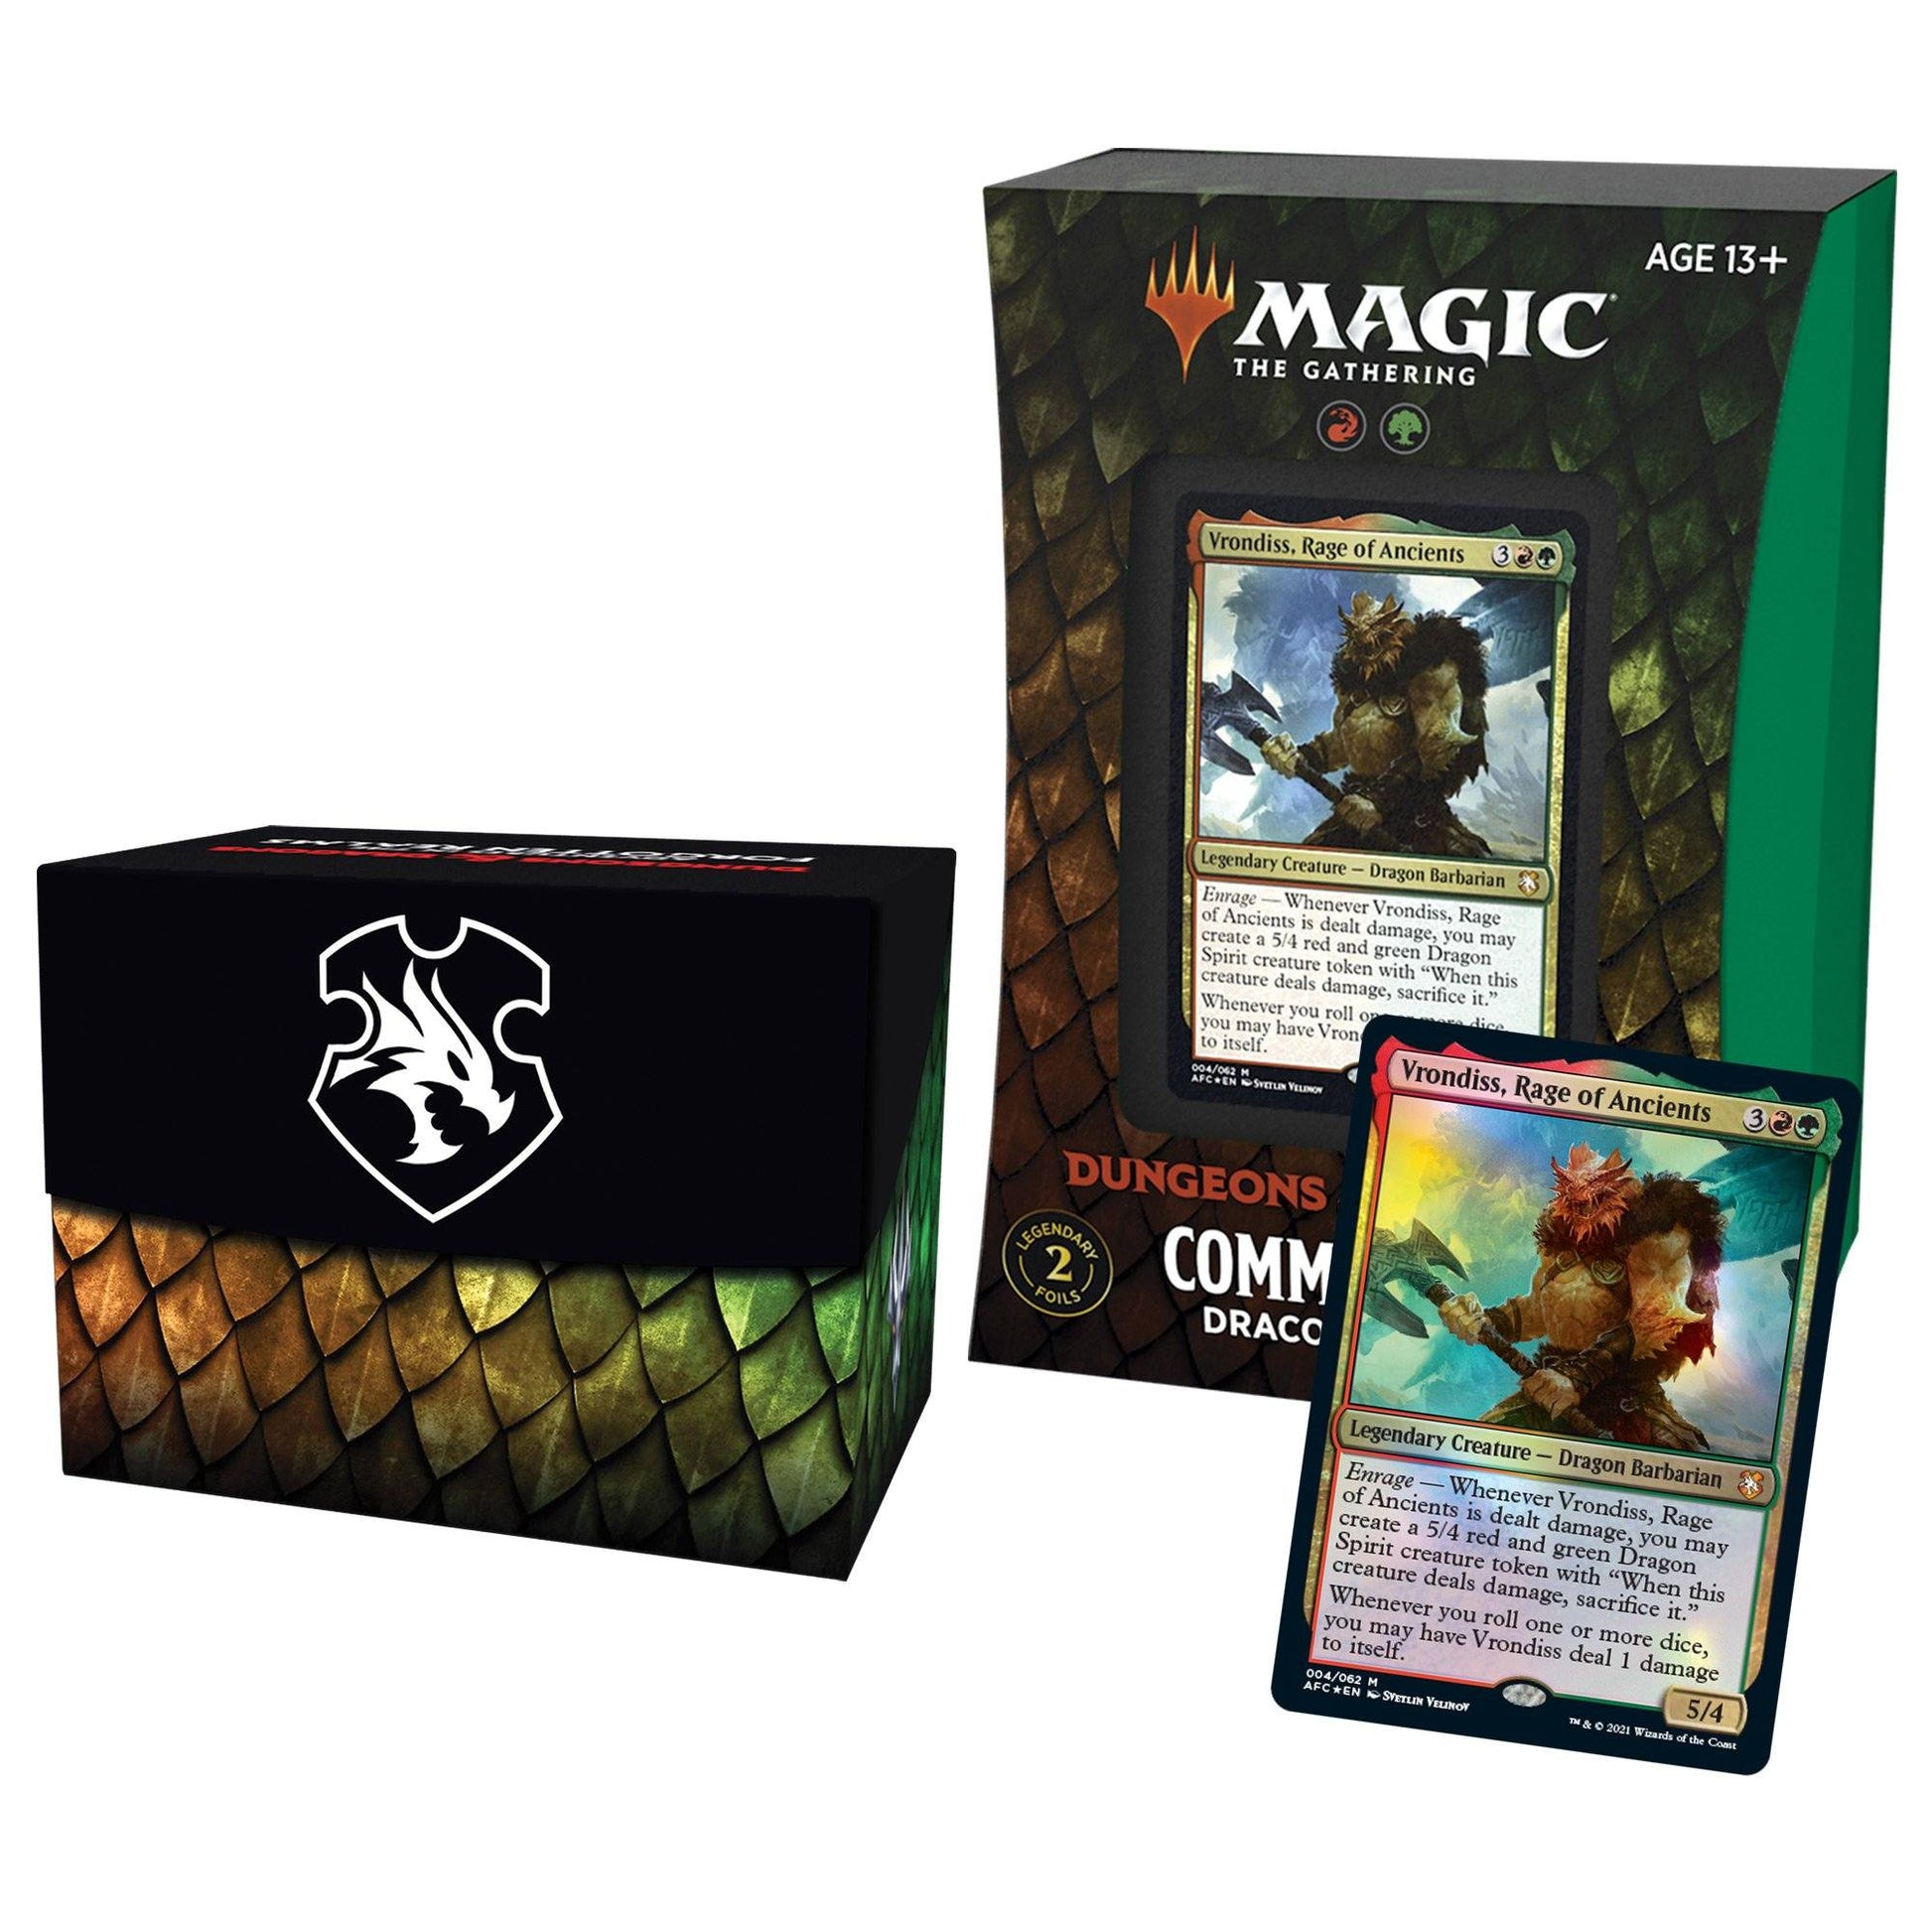 Magic the Gathering: Draconic Rage Commander Deck CCG Wizards of the Coast 